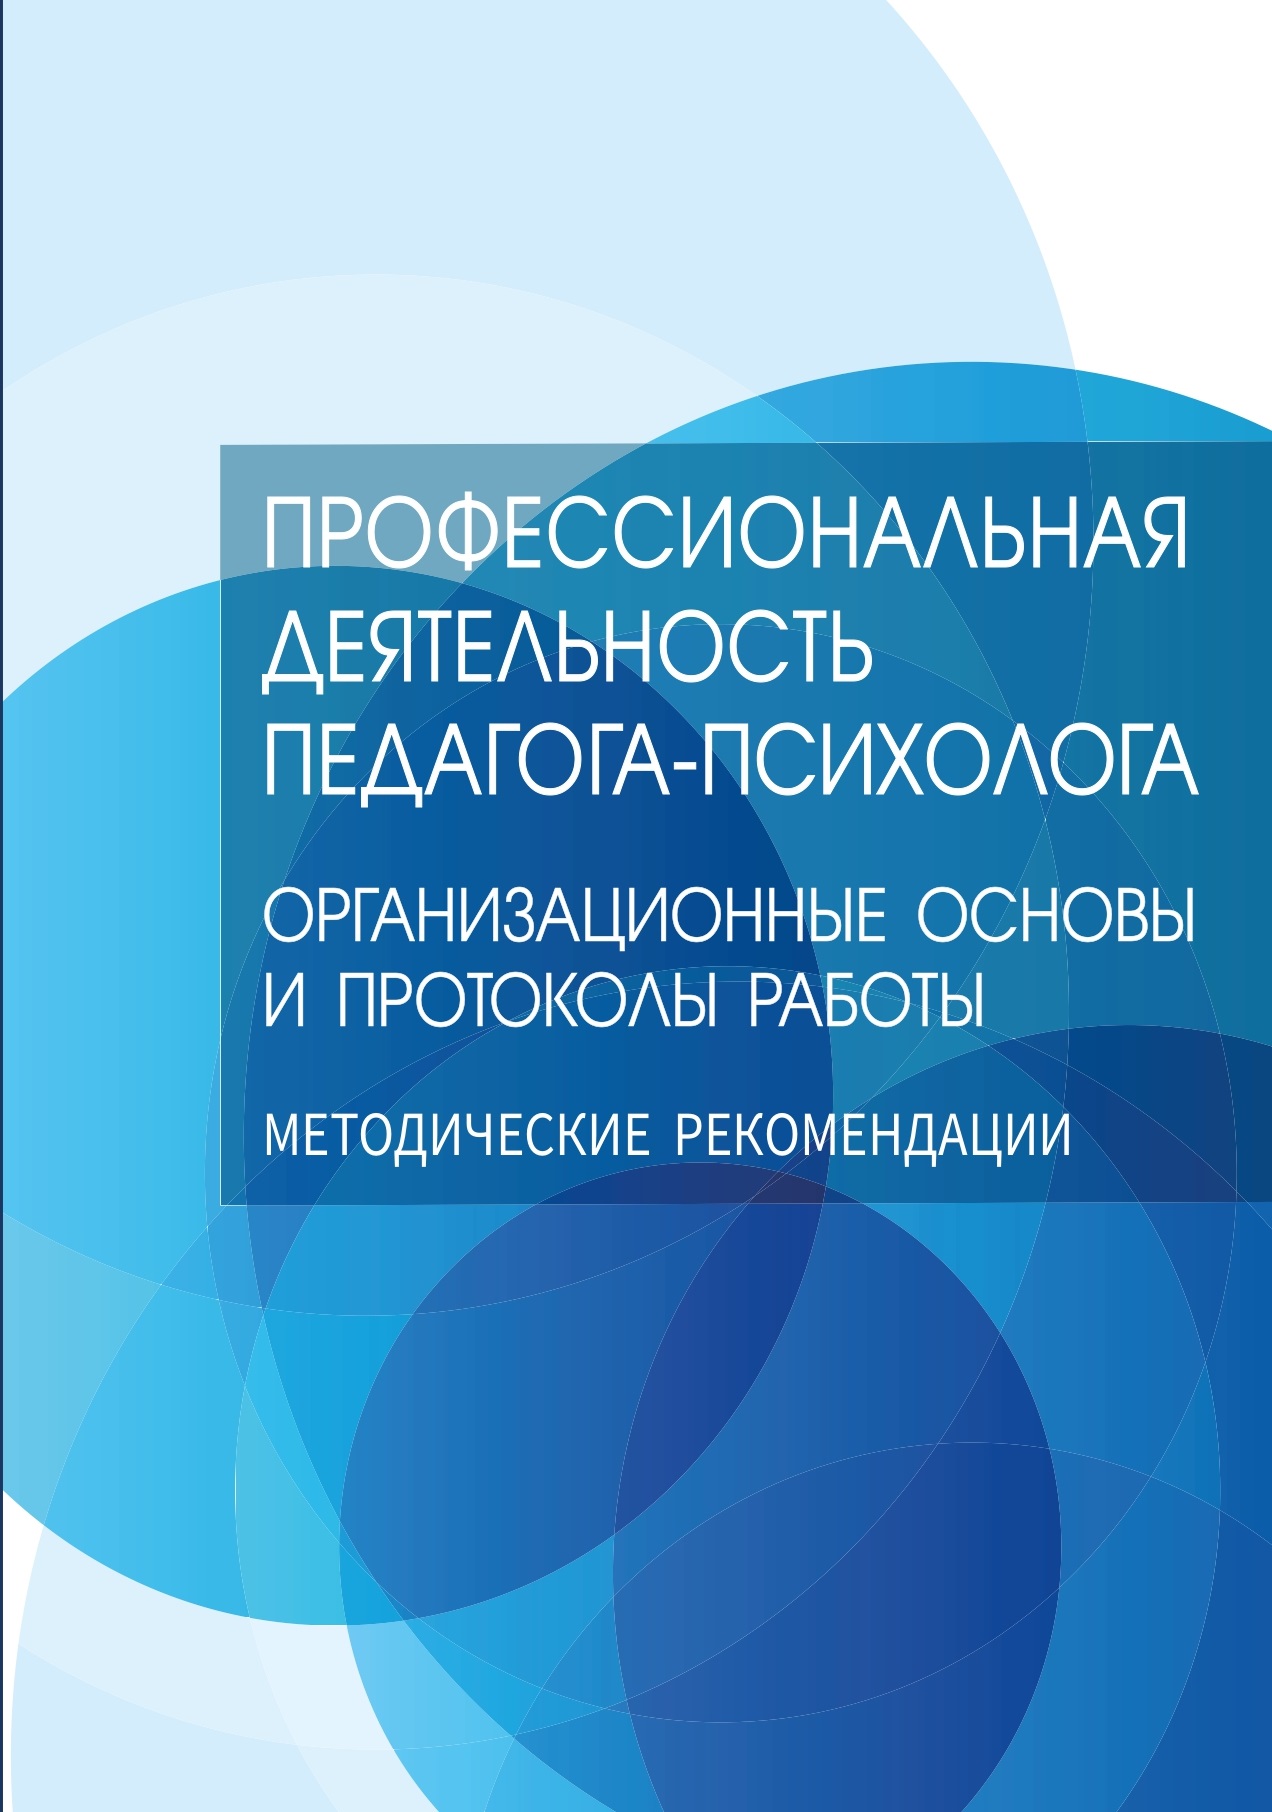                         Professional activity of a teacher-psychologist: organizational basis and work protocols: methodological recommendations
            